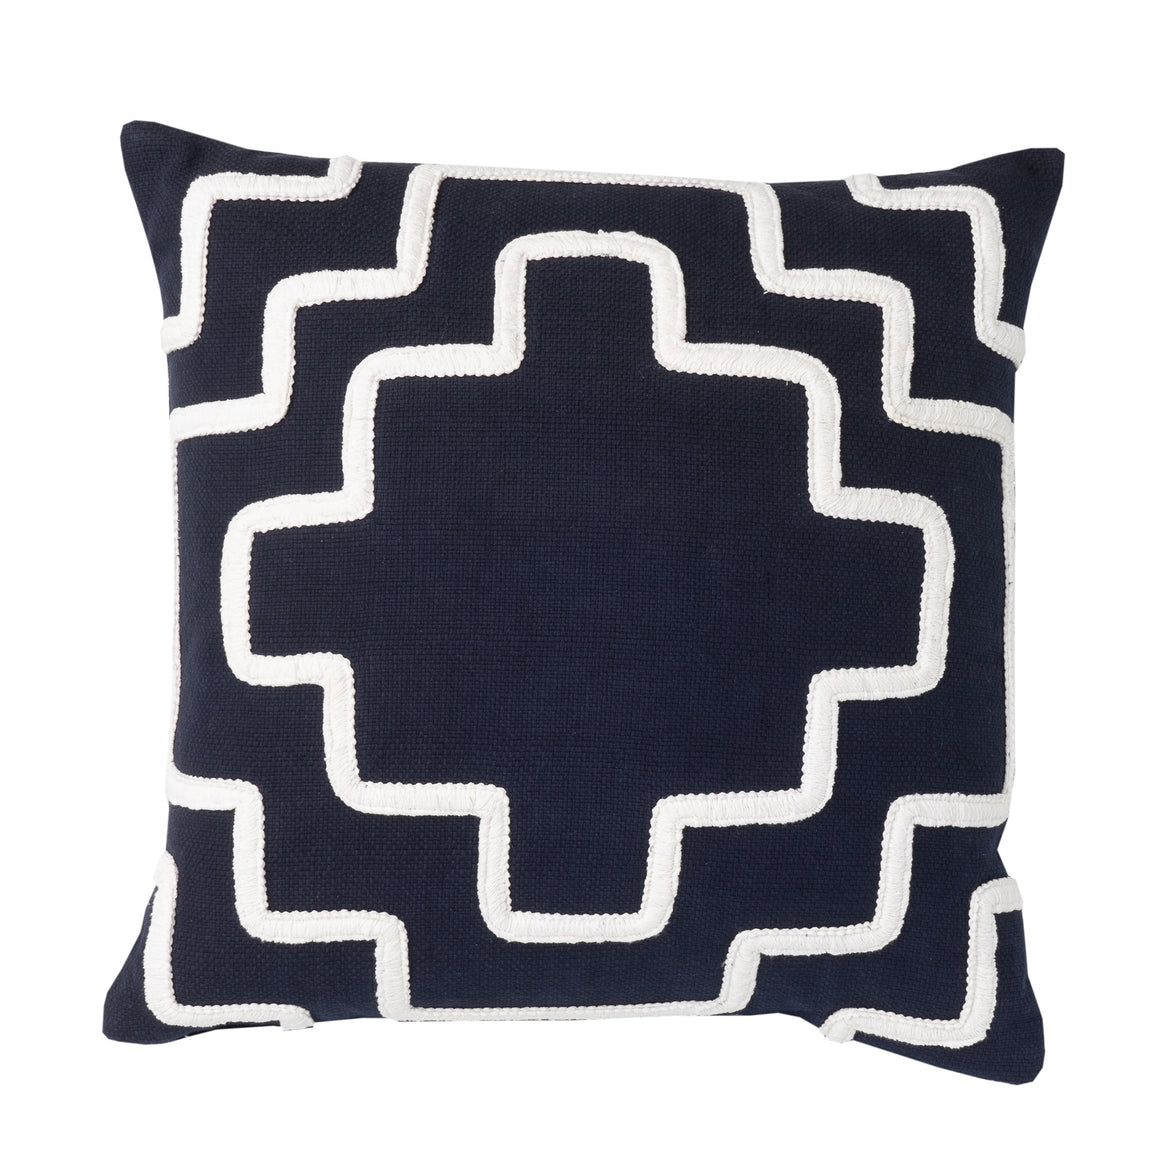 Textured Navy Cushion with White Patterned Detail